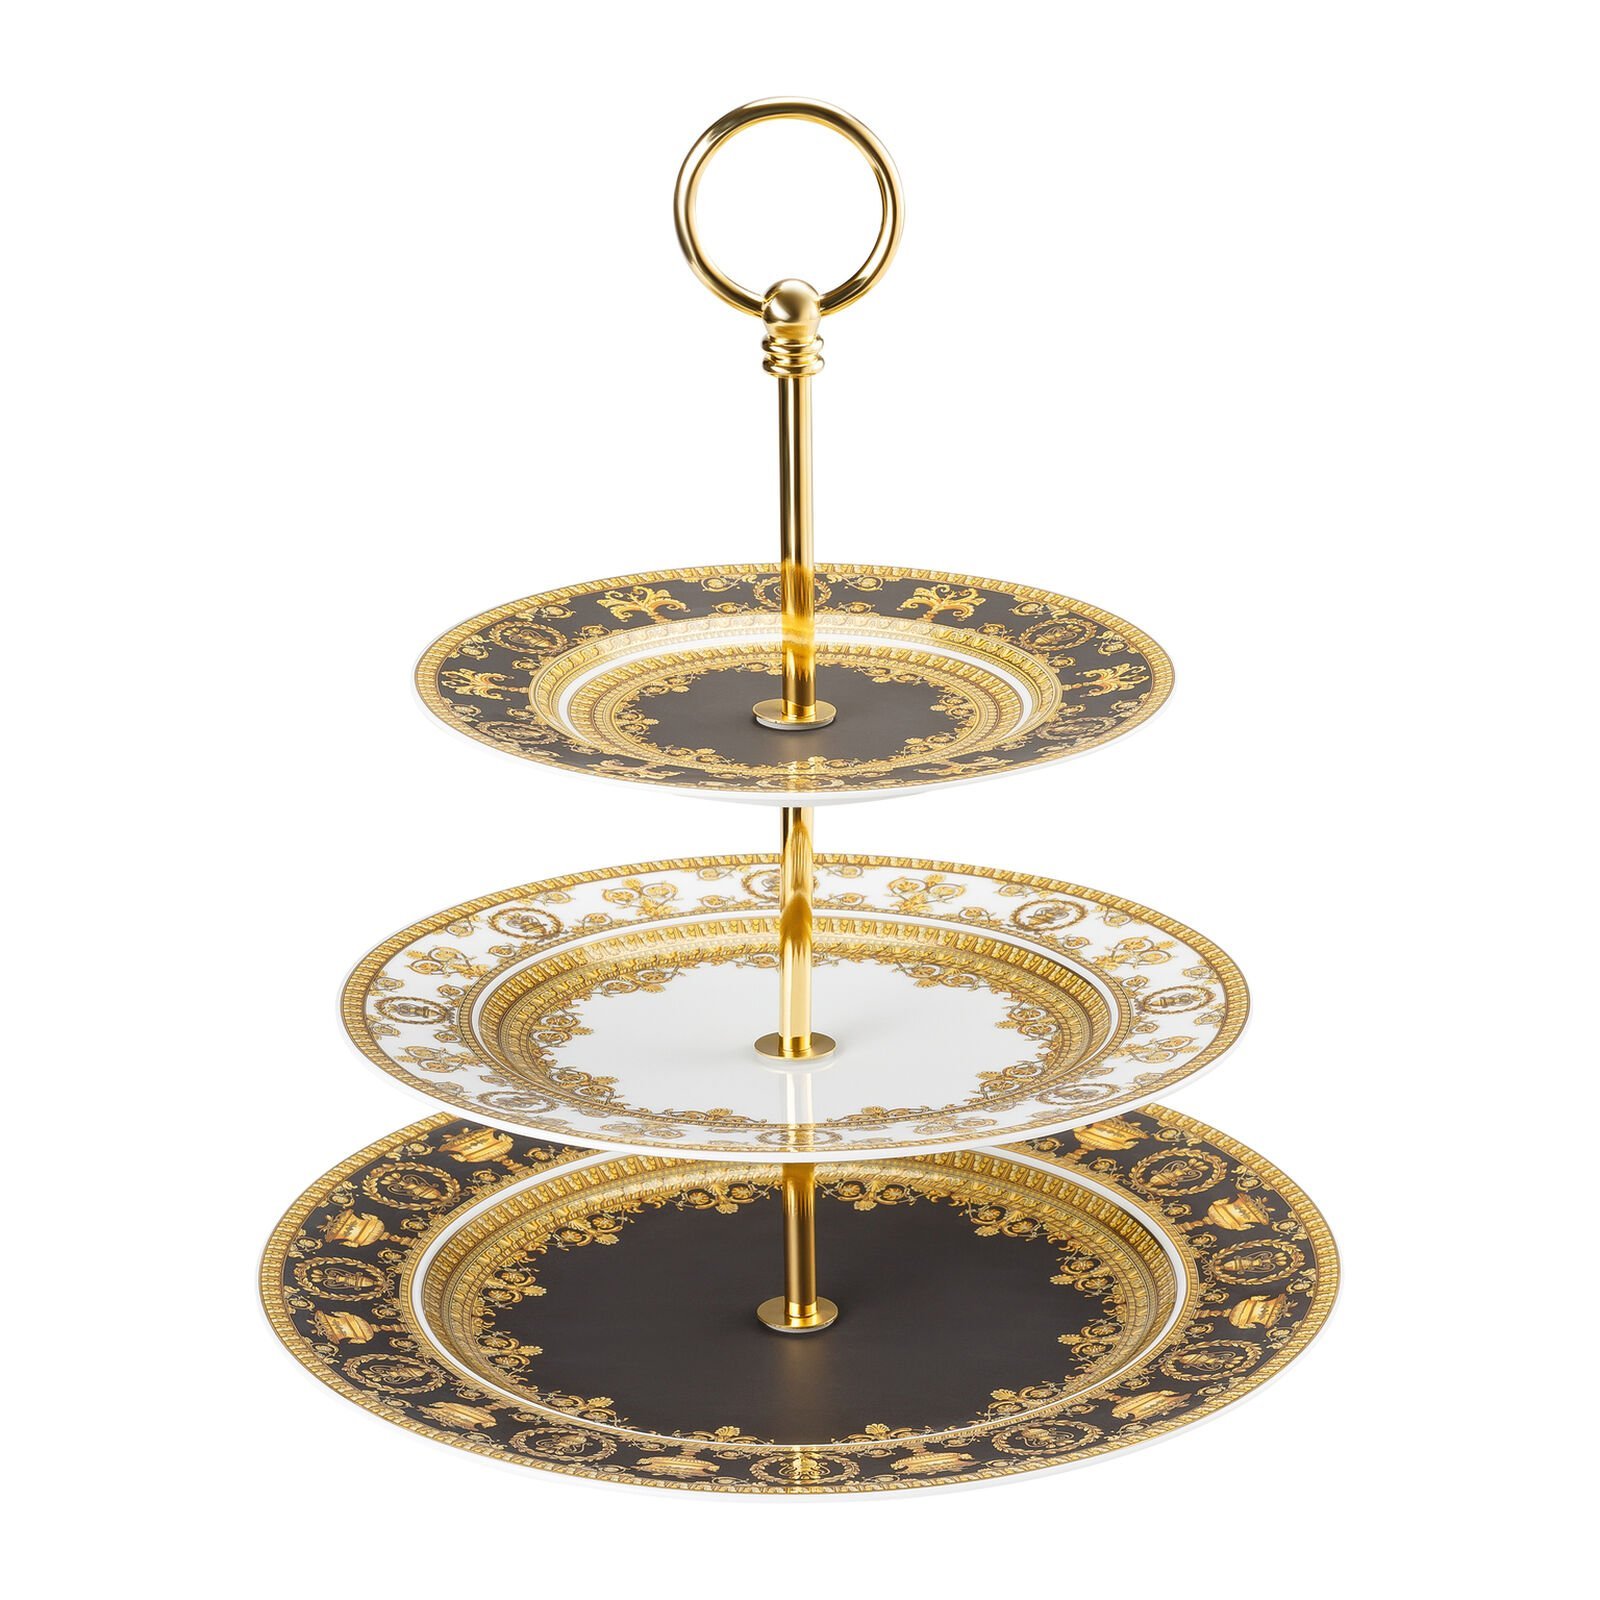 Versace Rosenthal I love Baroque etagere 3 tiers